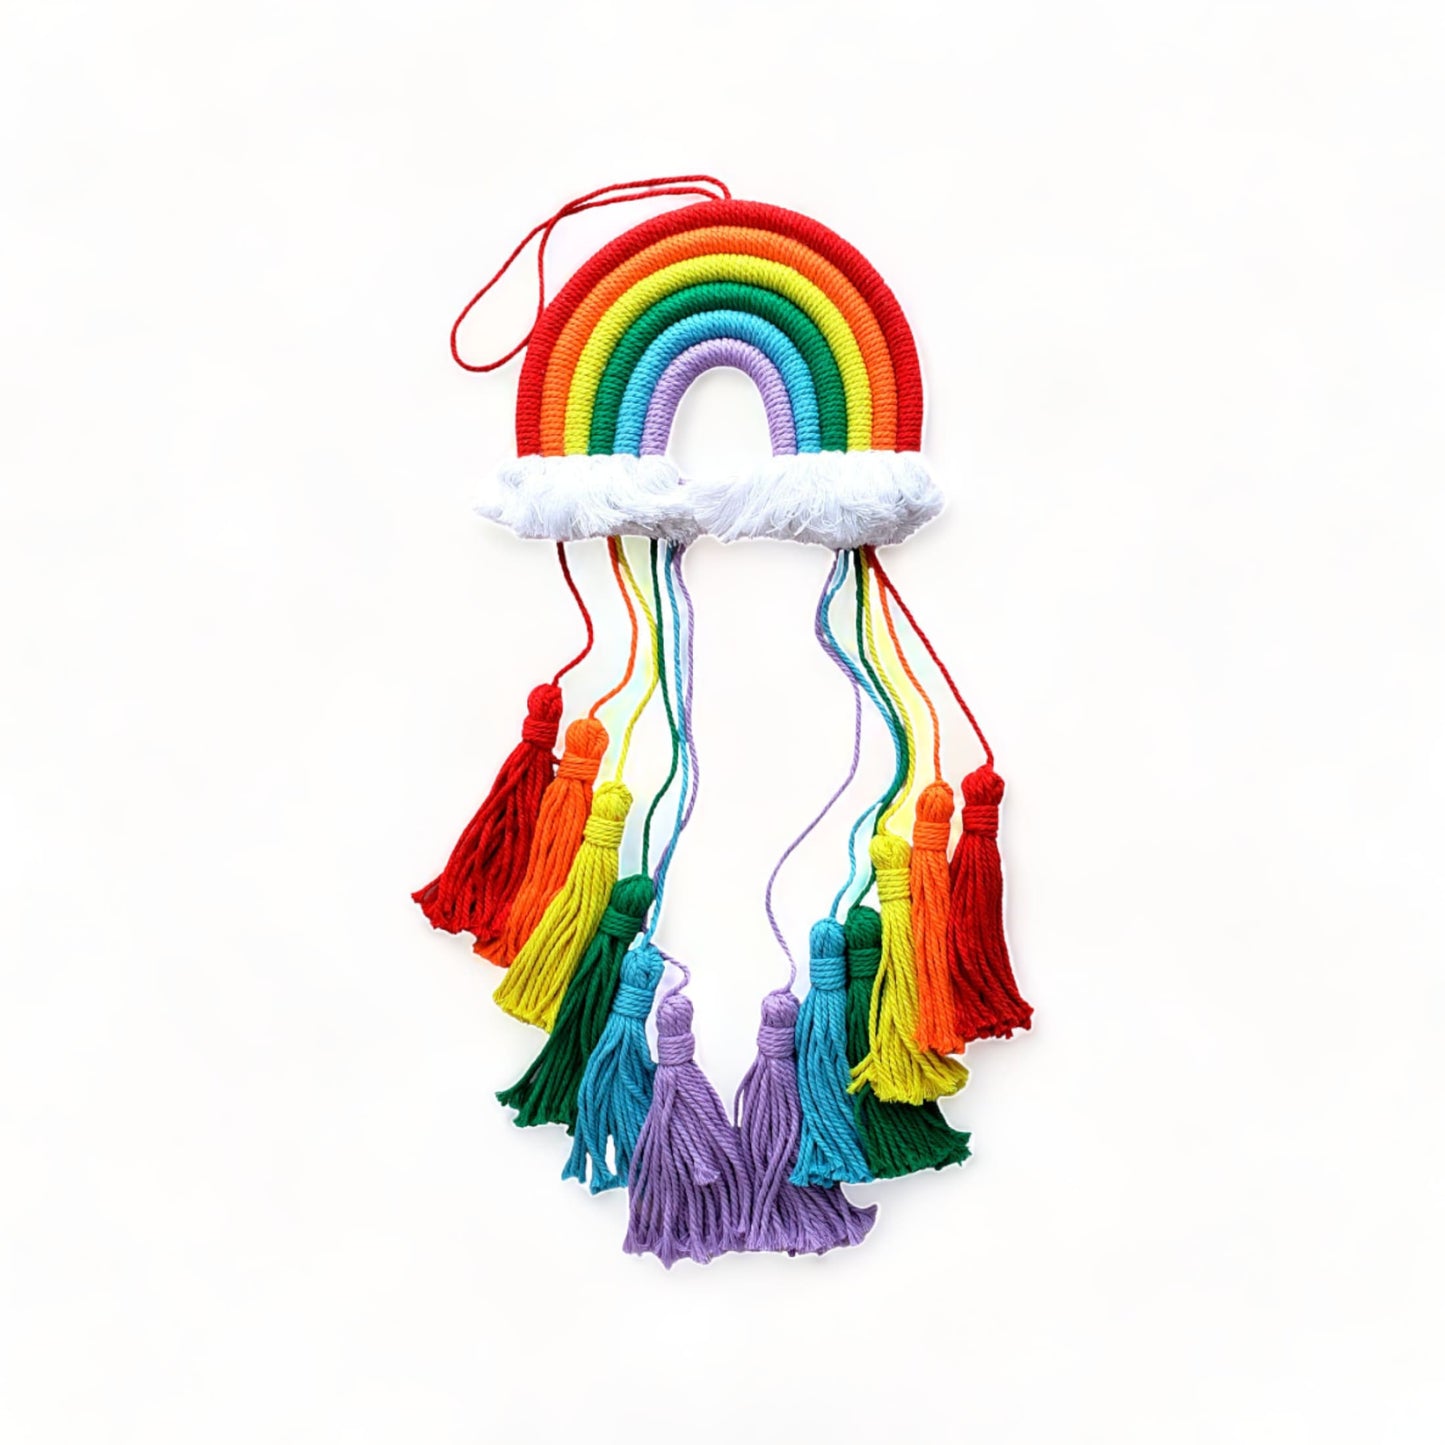 Whimsical Rainbow Macrame Wall Decor from Confetti Kitty, Only 24.99